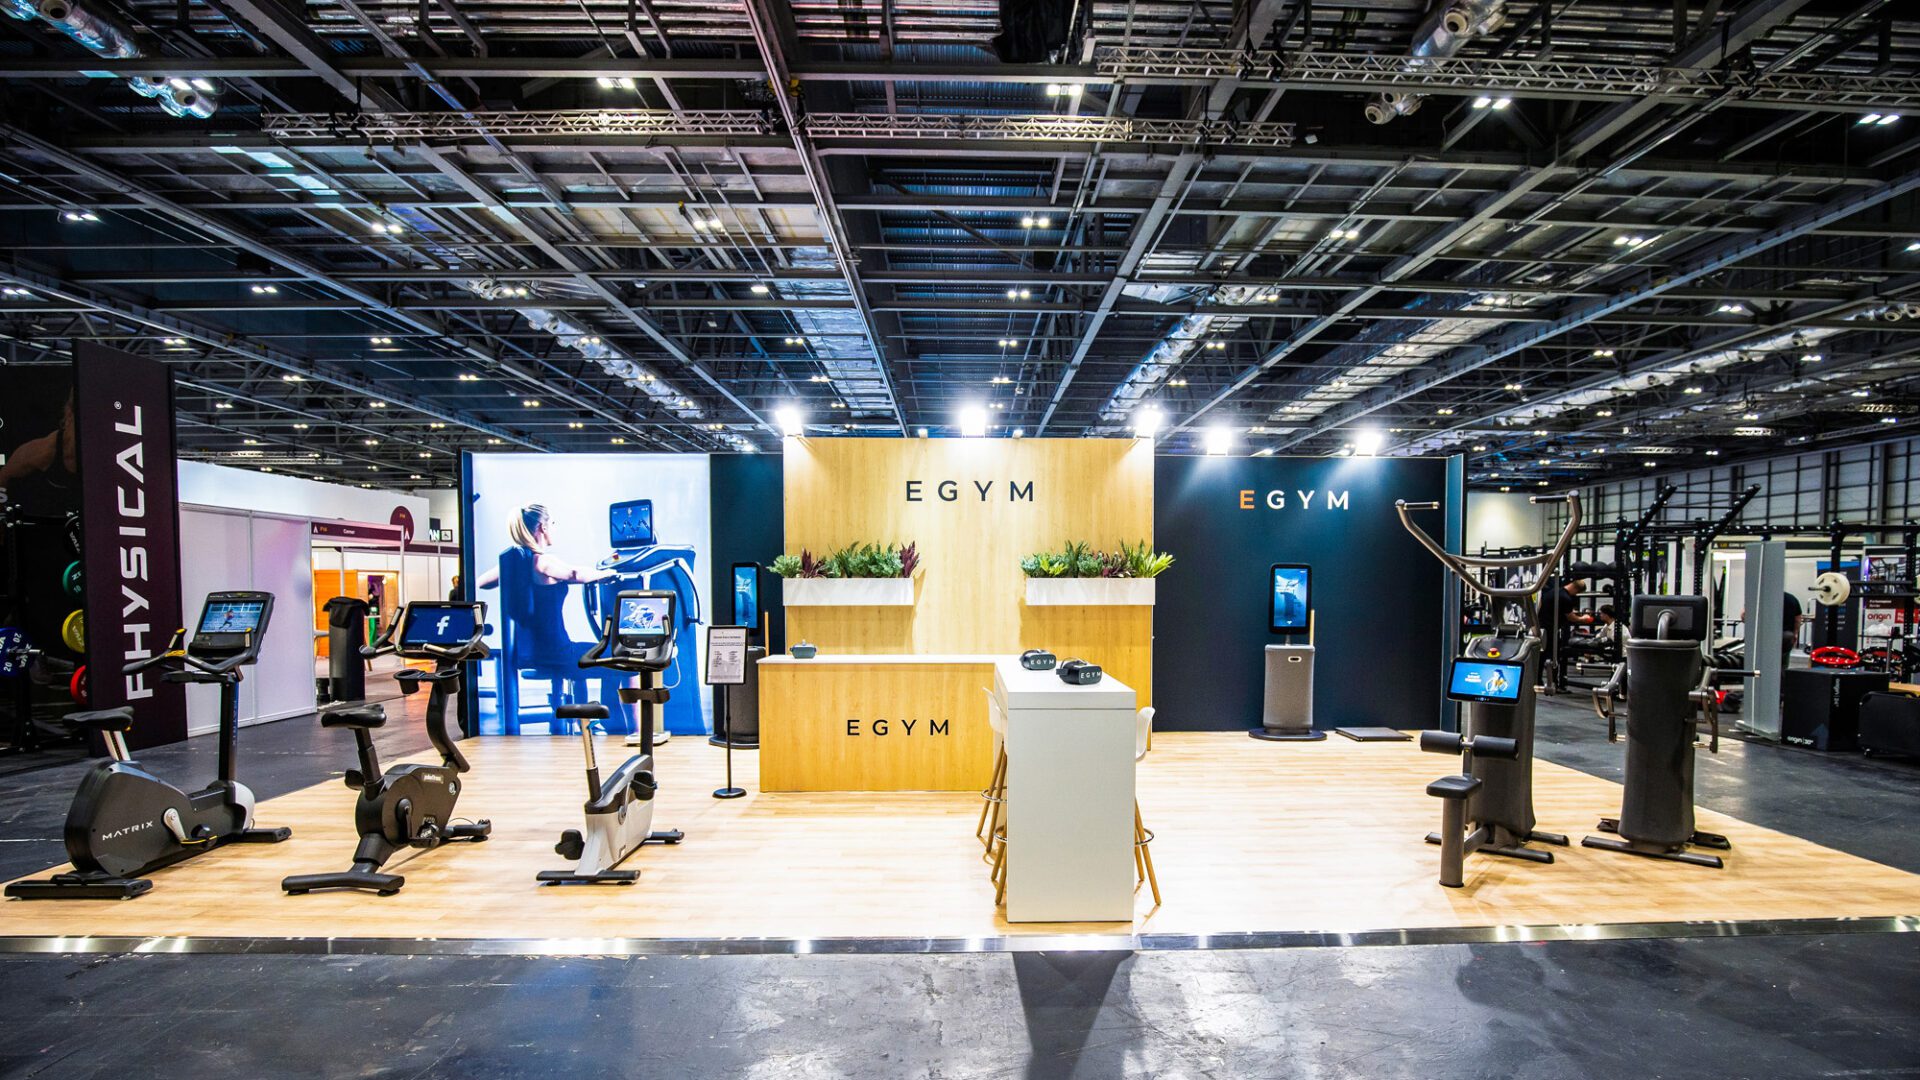 EGYM exhibition stand at Elevate